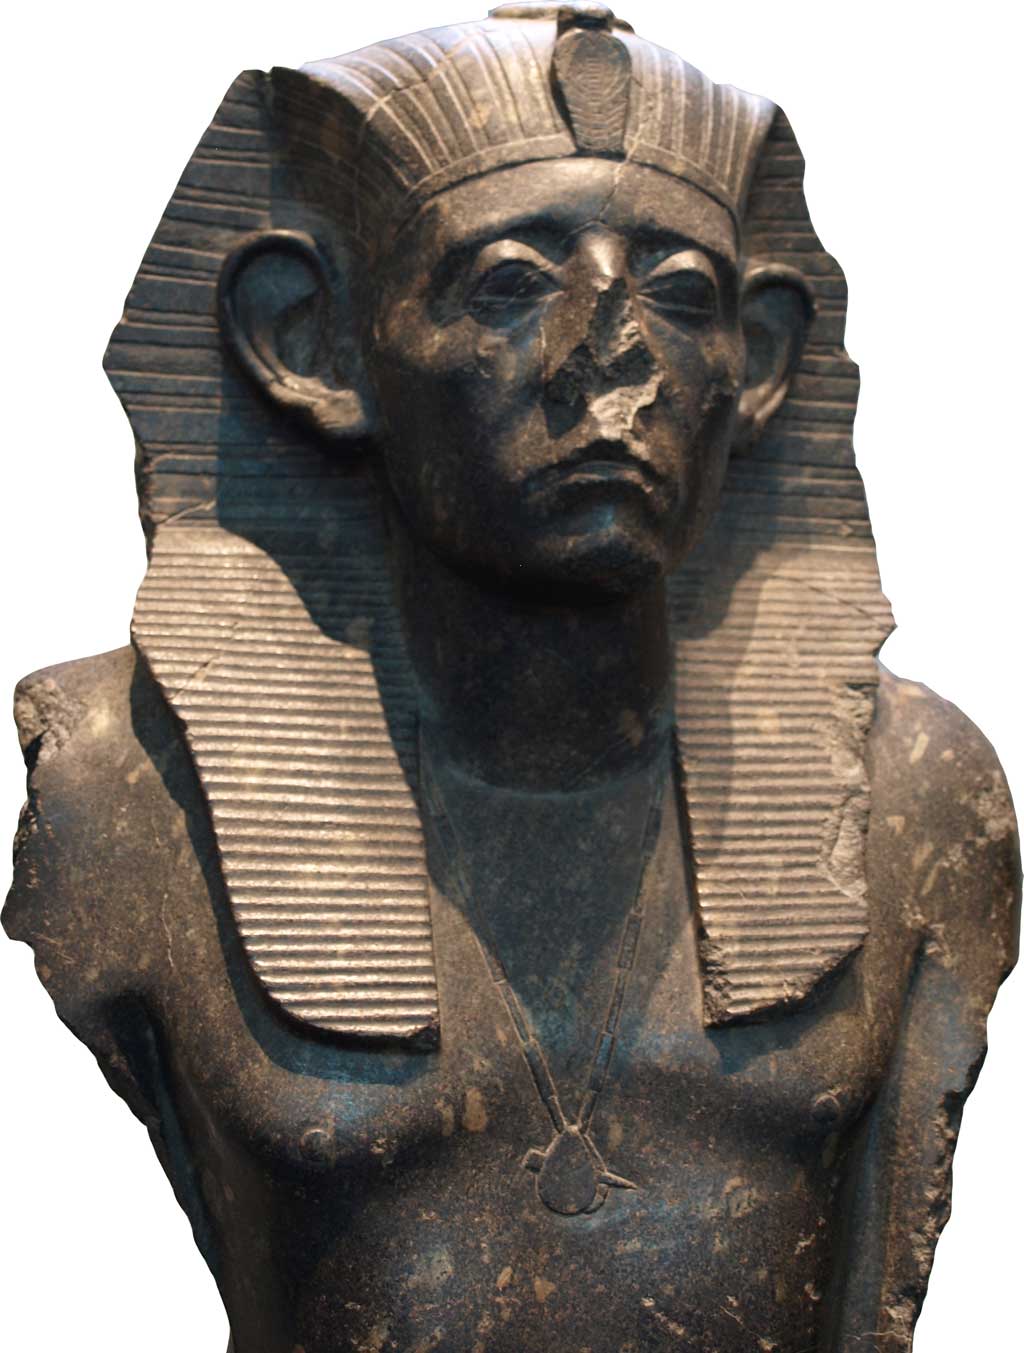 Black sandstone statue of Senusret III wearing the Pharaonic headdress. His nose is missing from the statue, suggesting that it was defaced. His eyes are contemplative and his brow tense, connoting perhaps his recognition of the vicissitudes which have befallen Egypt in prior centuries.